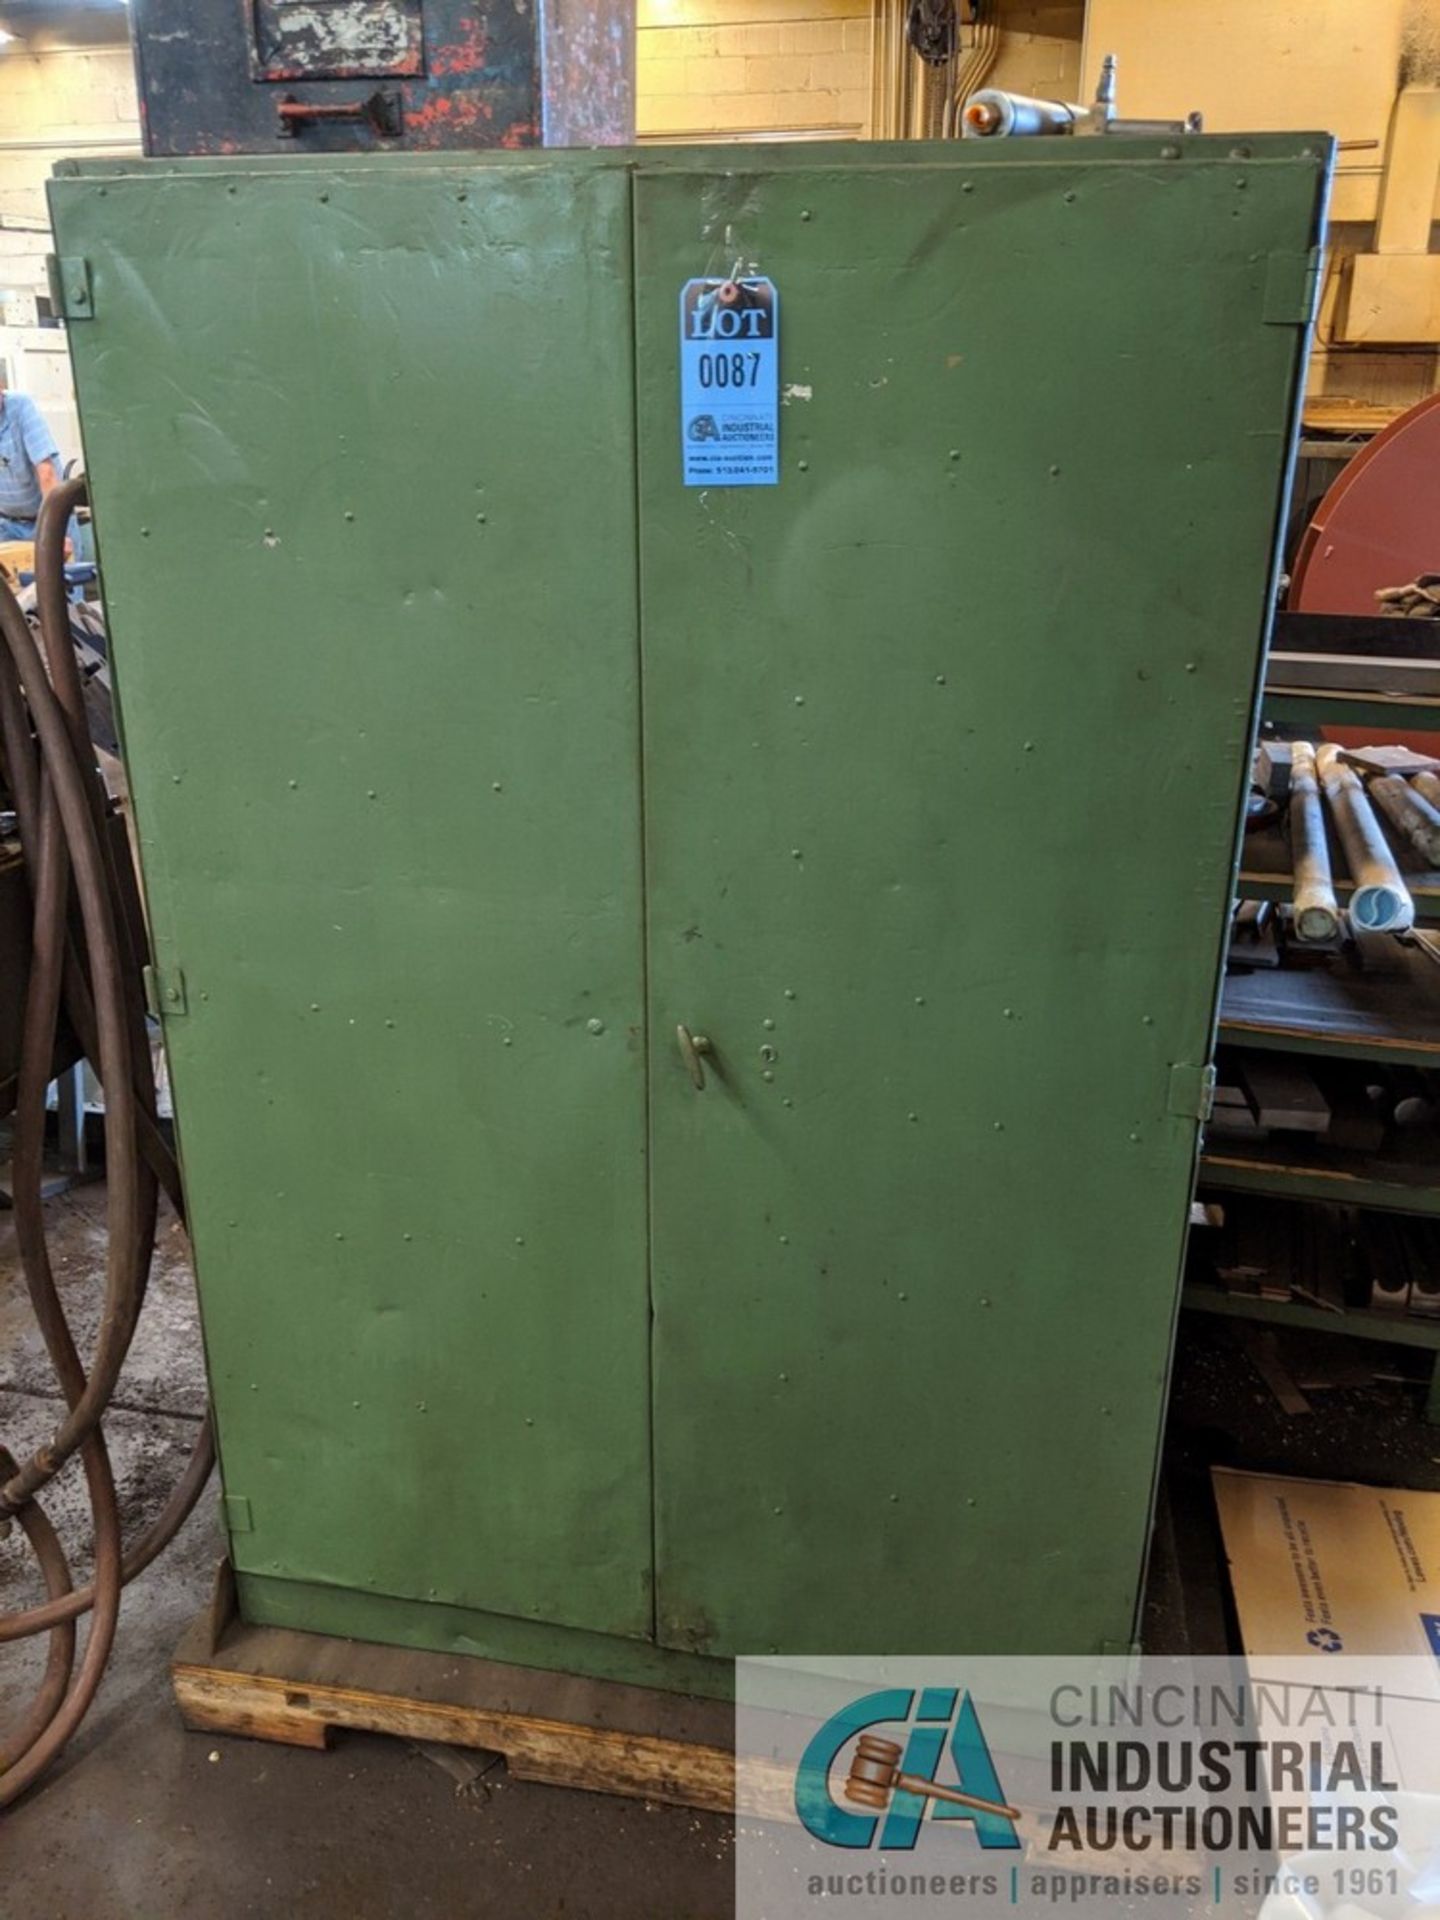 (LOT) STEEL CABINET WITH CONTENTS: HARDNAIL, WIRE, MACHINE PARTS AND OTHER